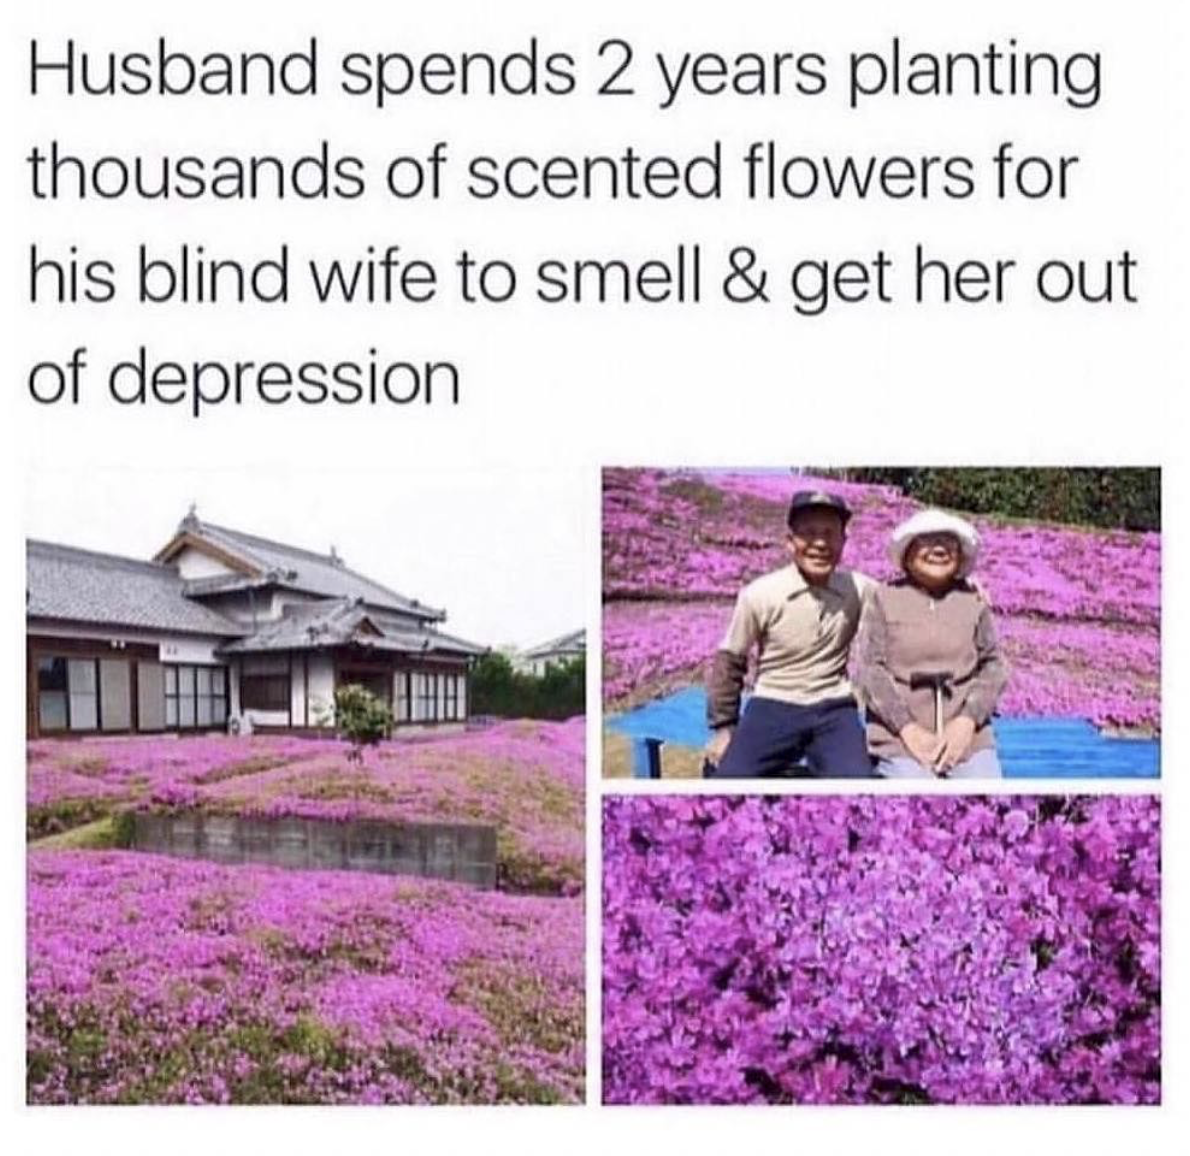 husband spends two years planting flowers - Husband spends 2 years planting thousands of scented flowers for his blind wife to smell & get her out of depression